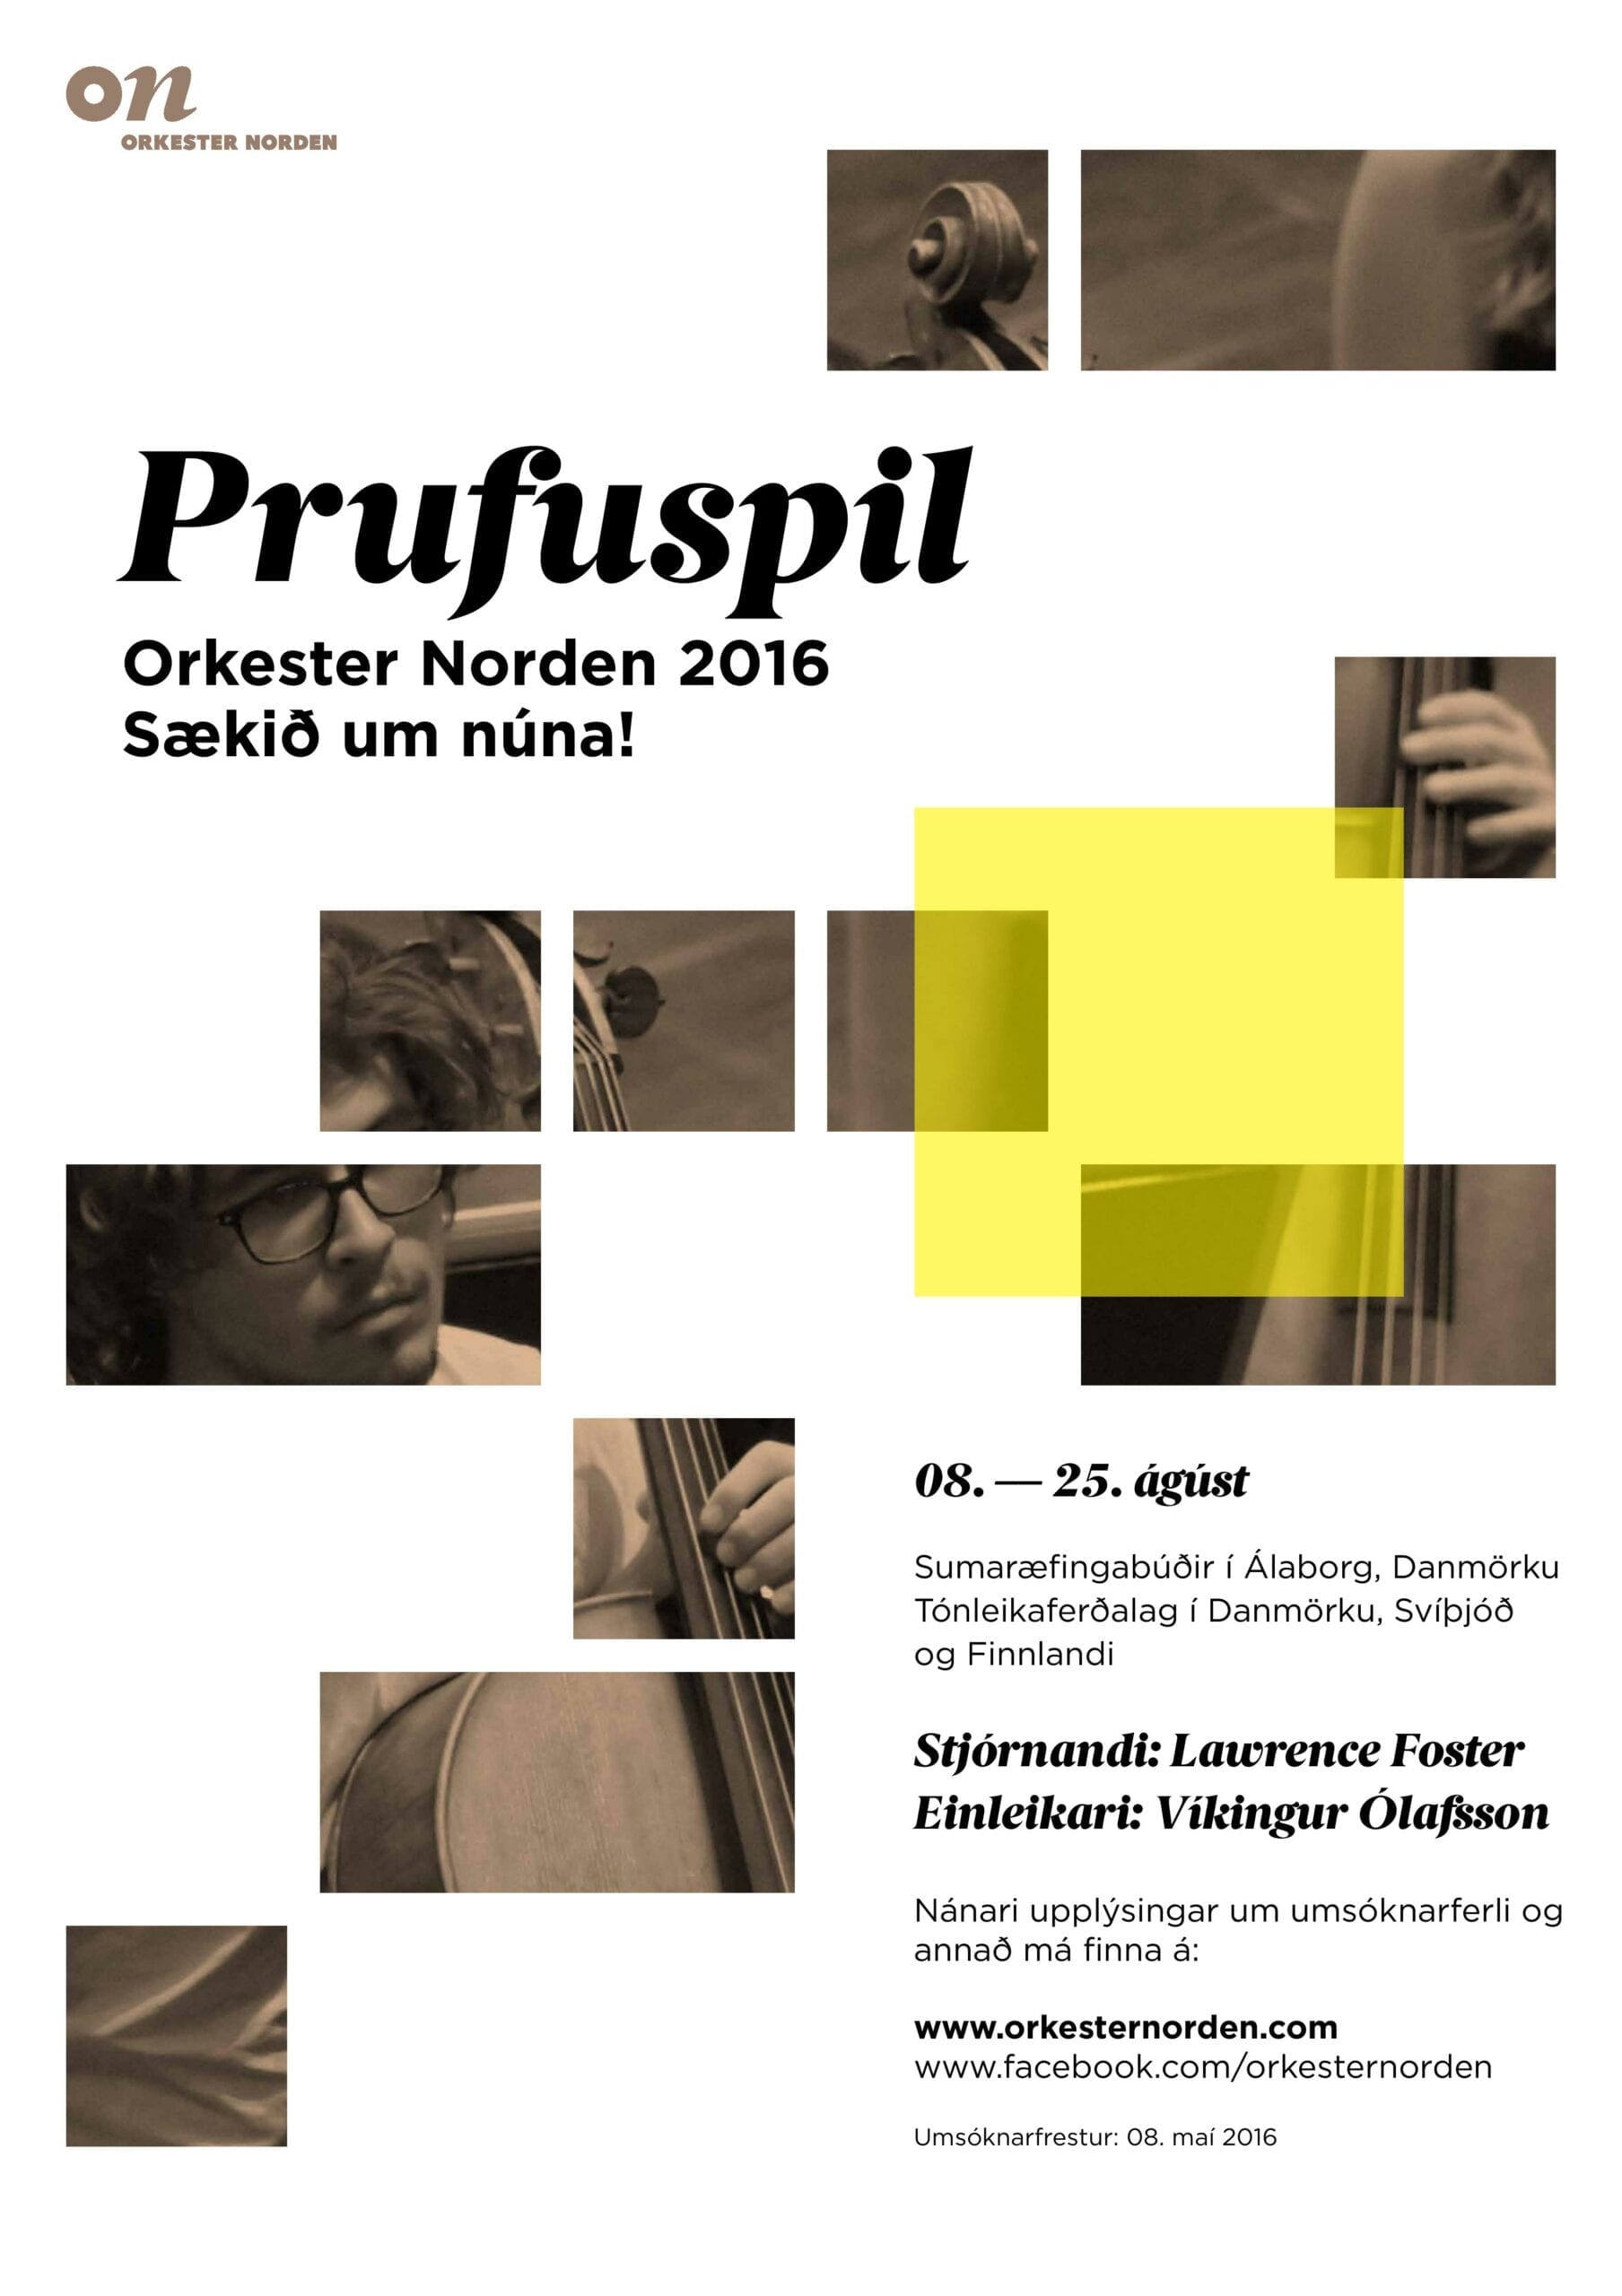 Orkester Norden has started audition for the summercamp 2016